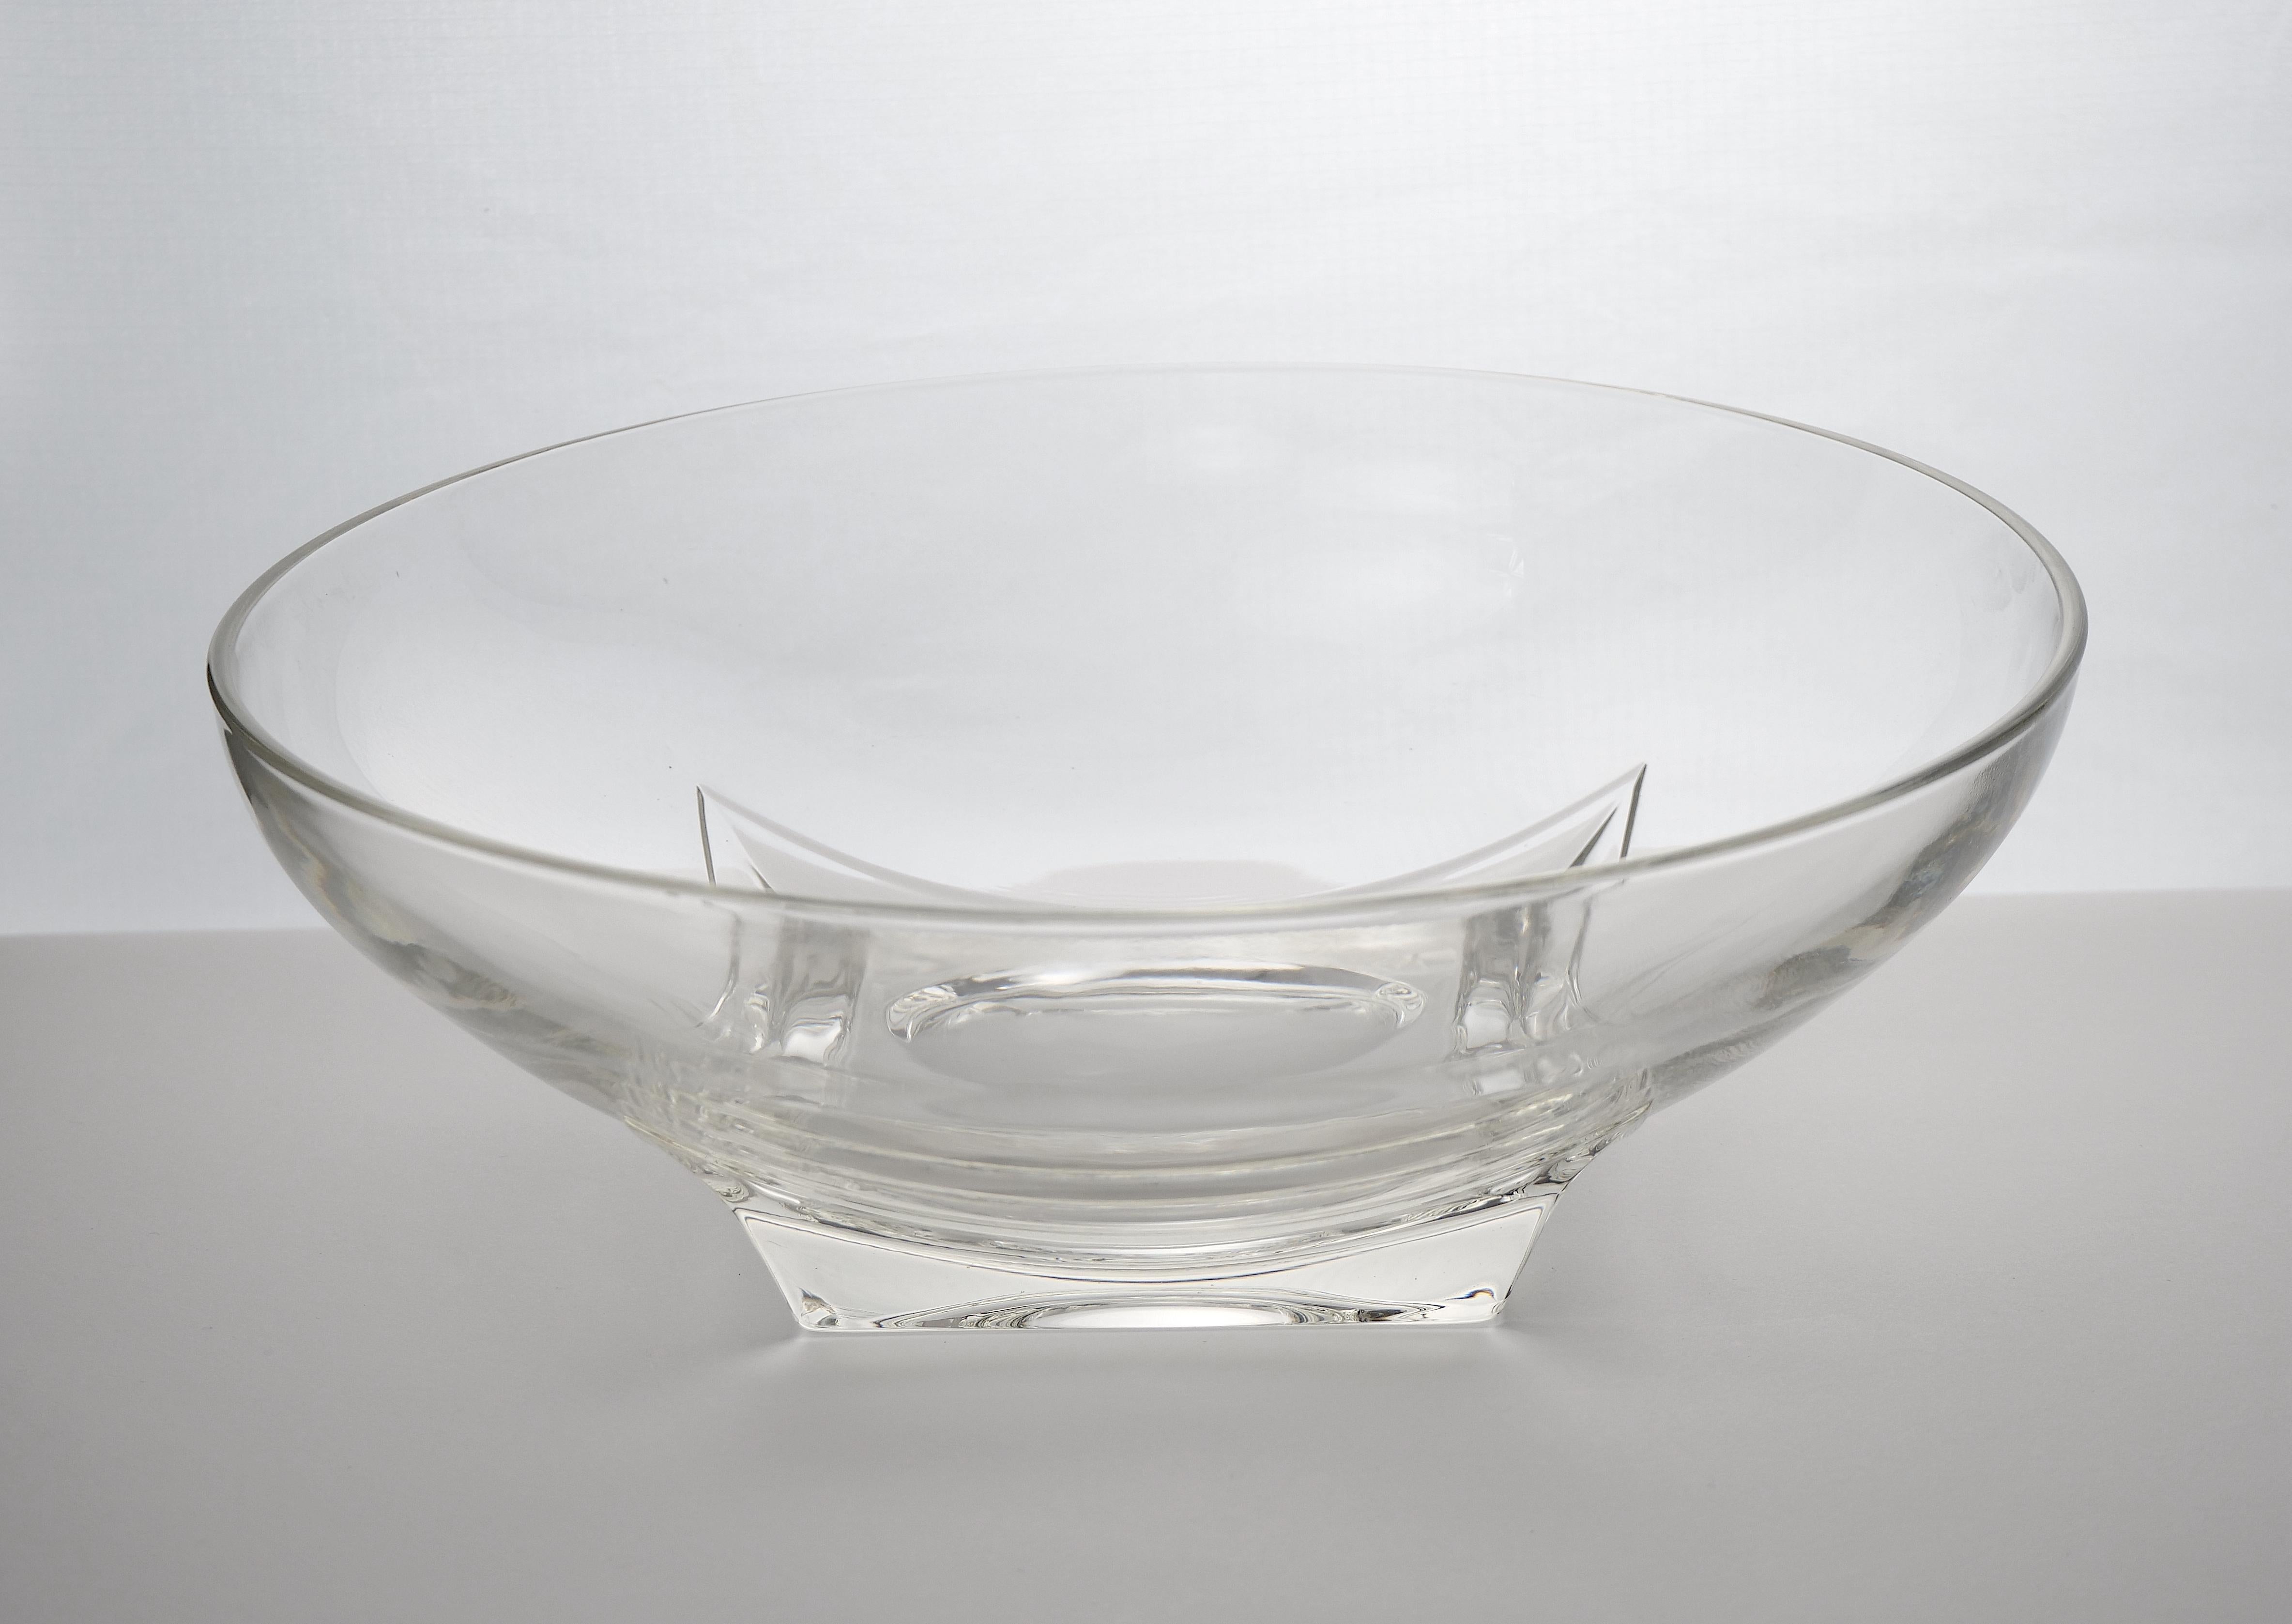 French Mid-Century Modern Art Deco Style Glass Centerpiece Bowl For Sale 1